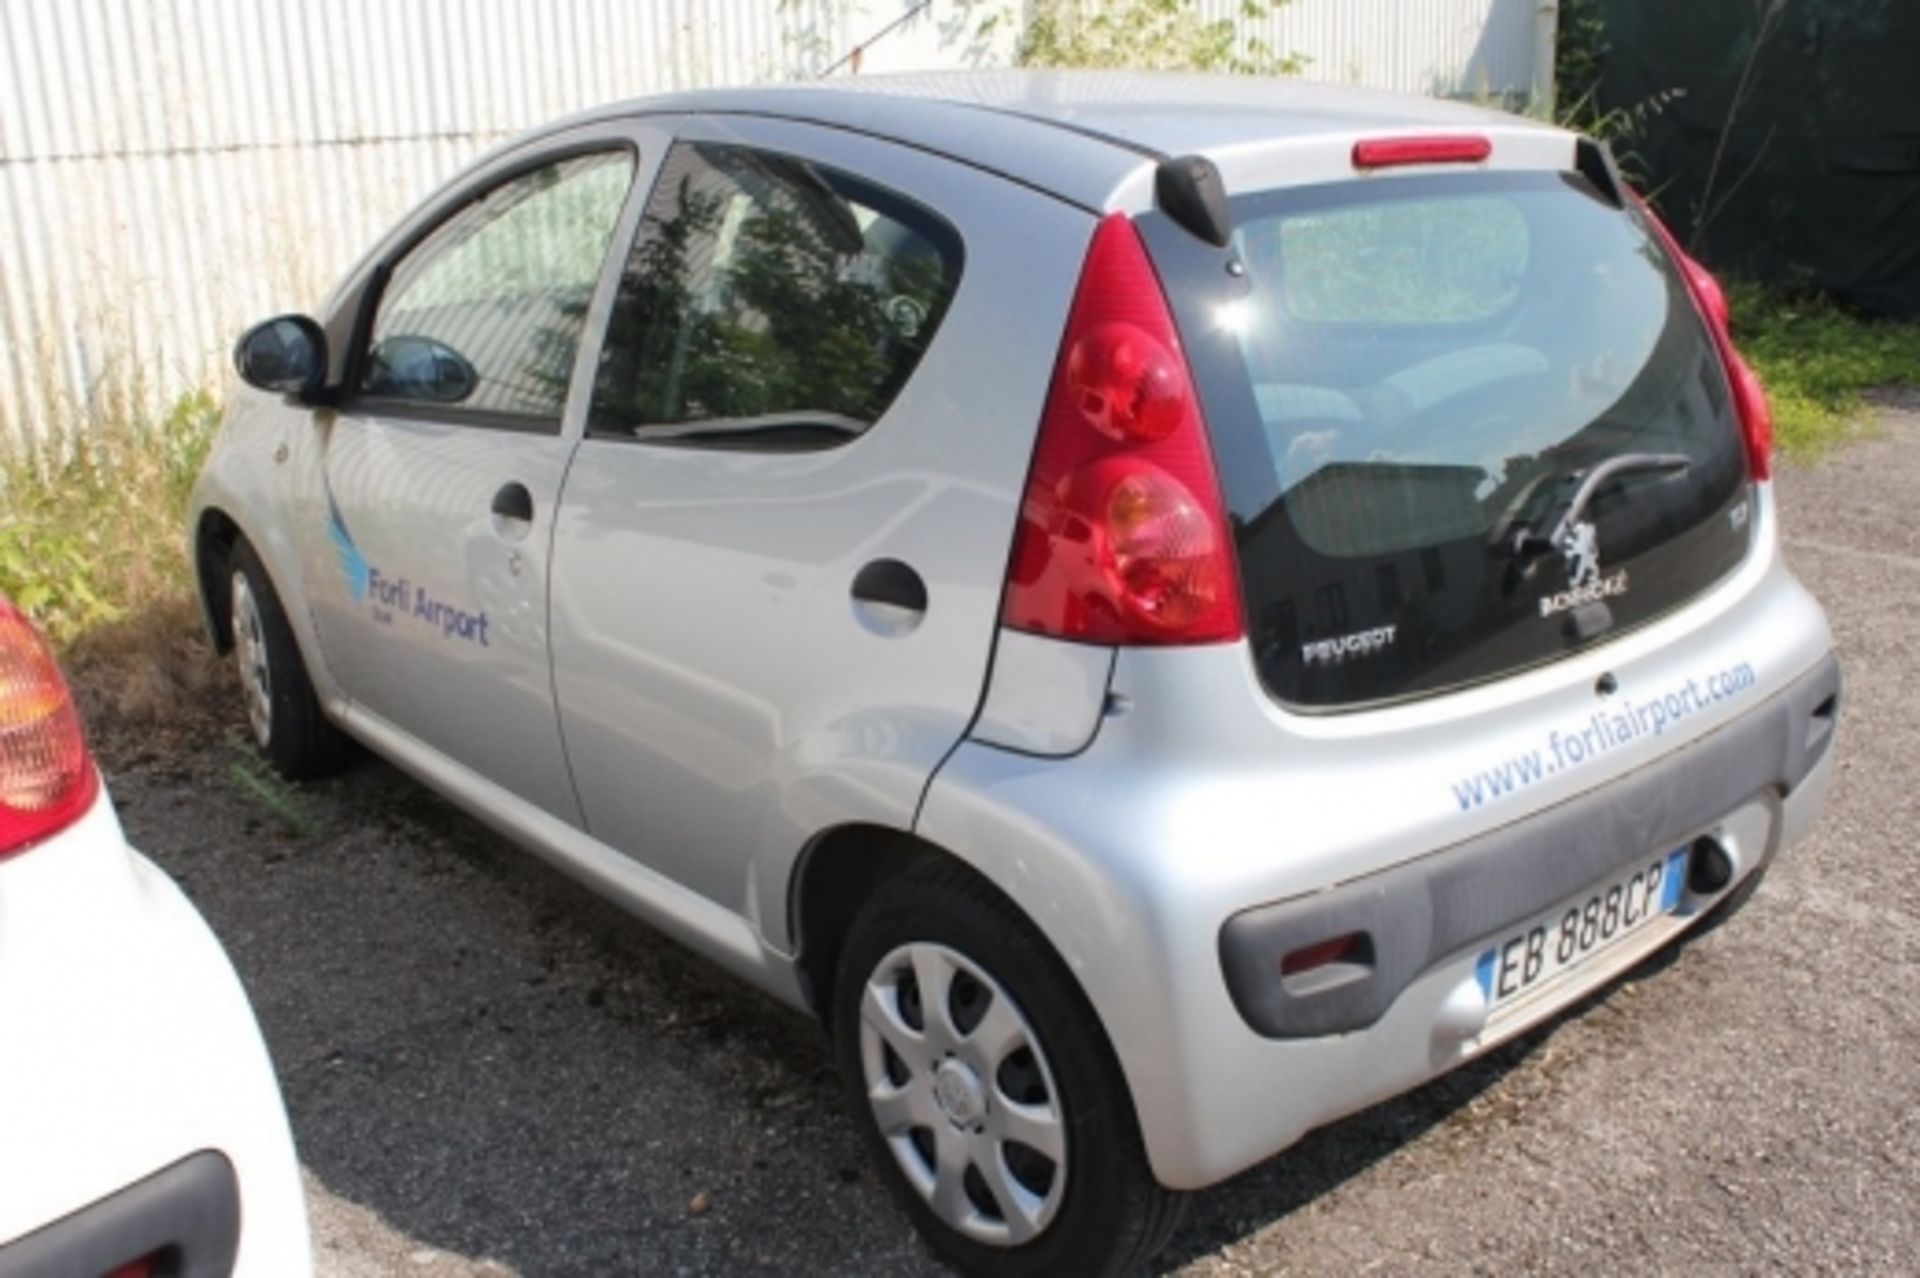 1,Peugeot 107 Plate:EB888CP color: white, gasoline engine, mileage: 16.316 km, body: various dents